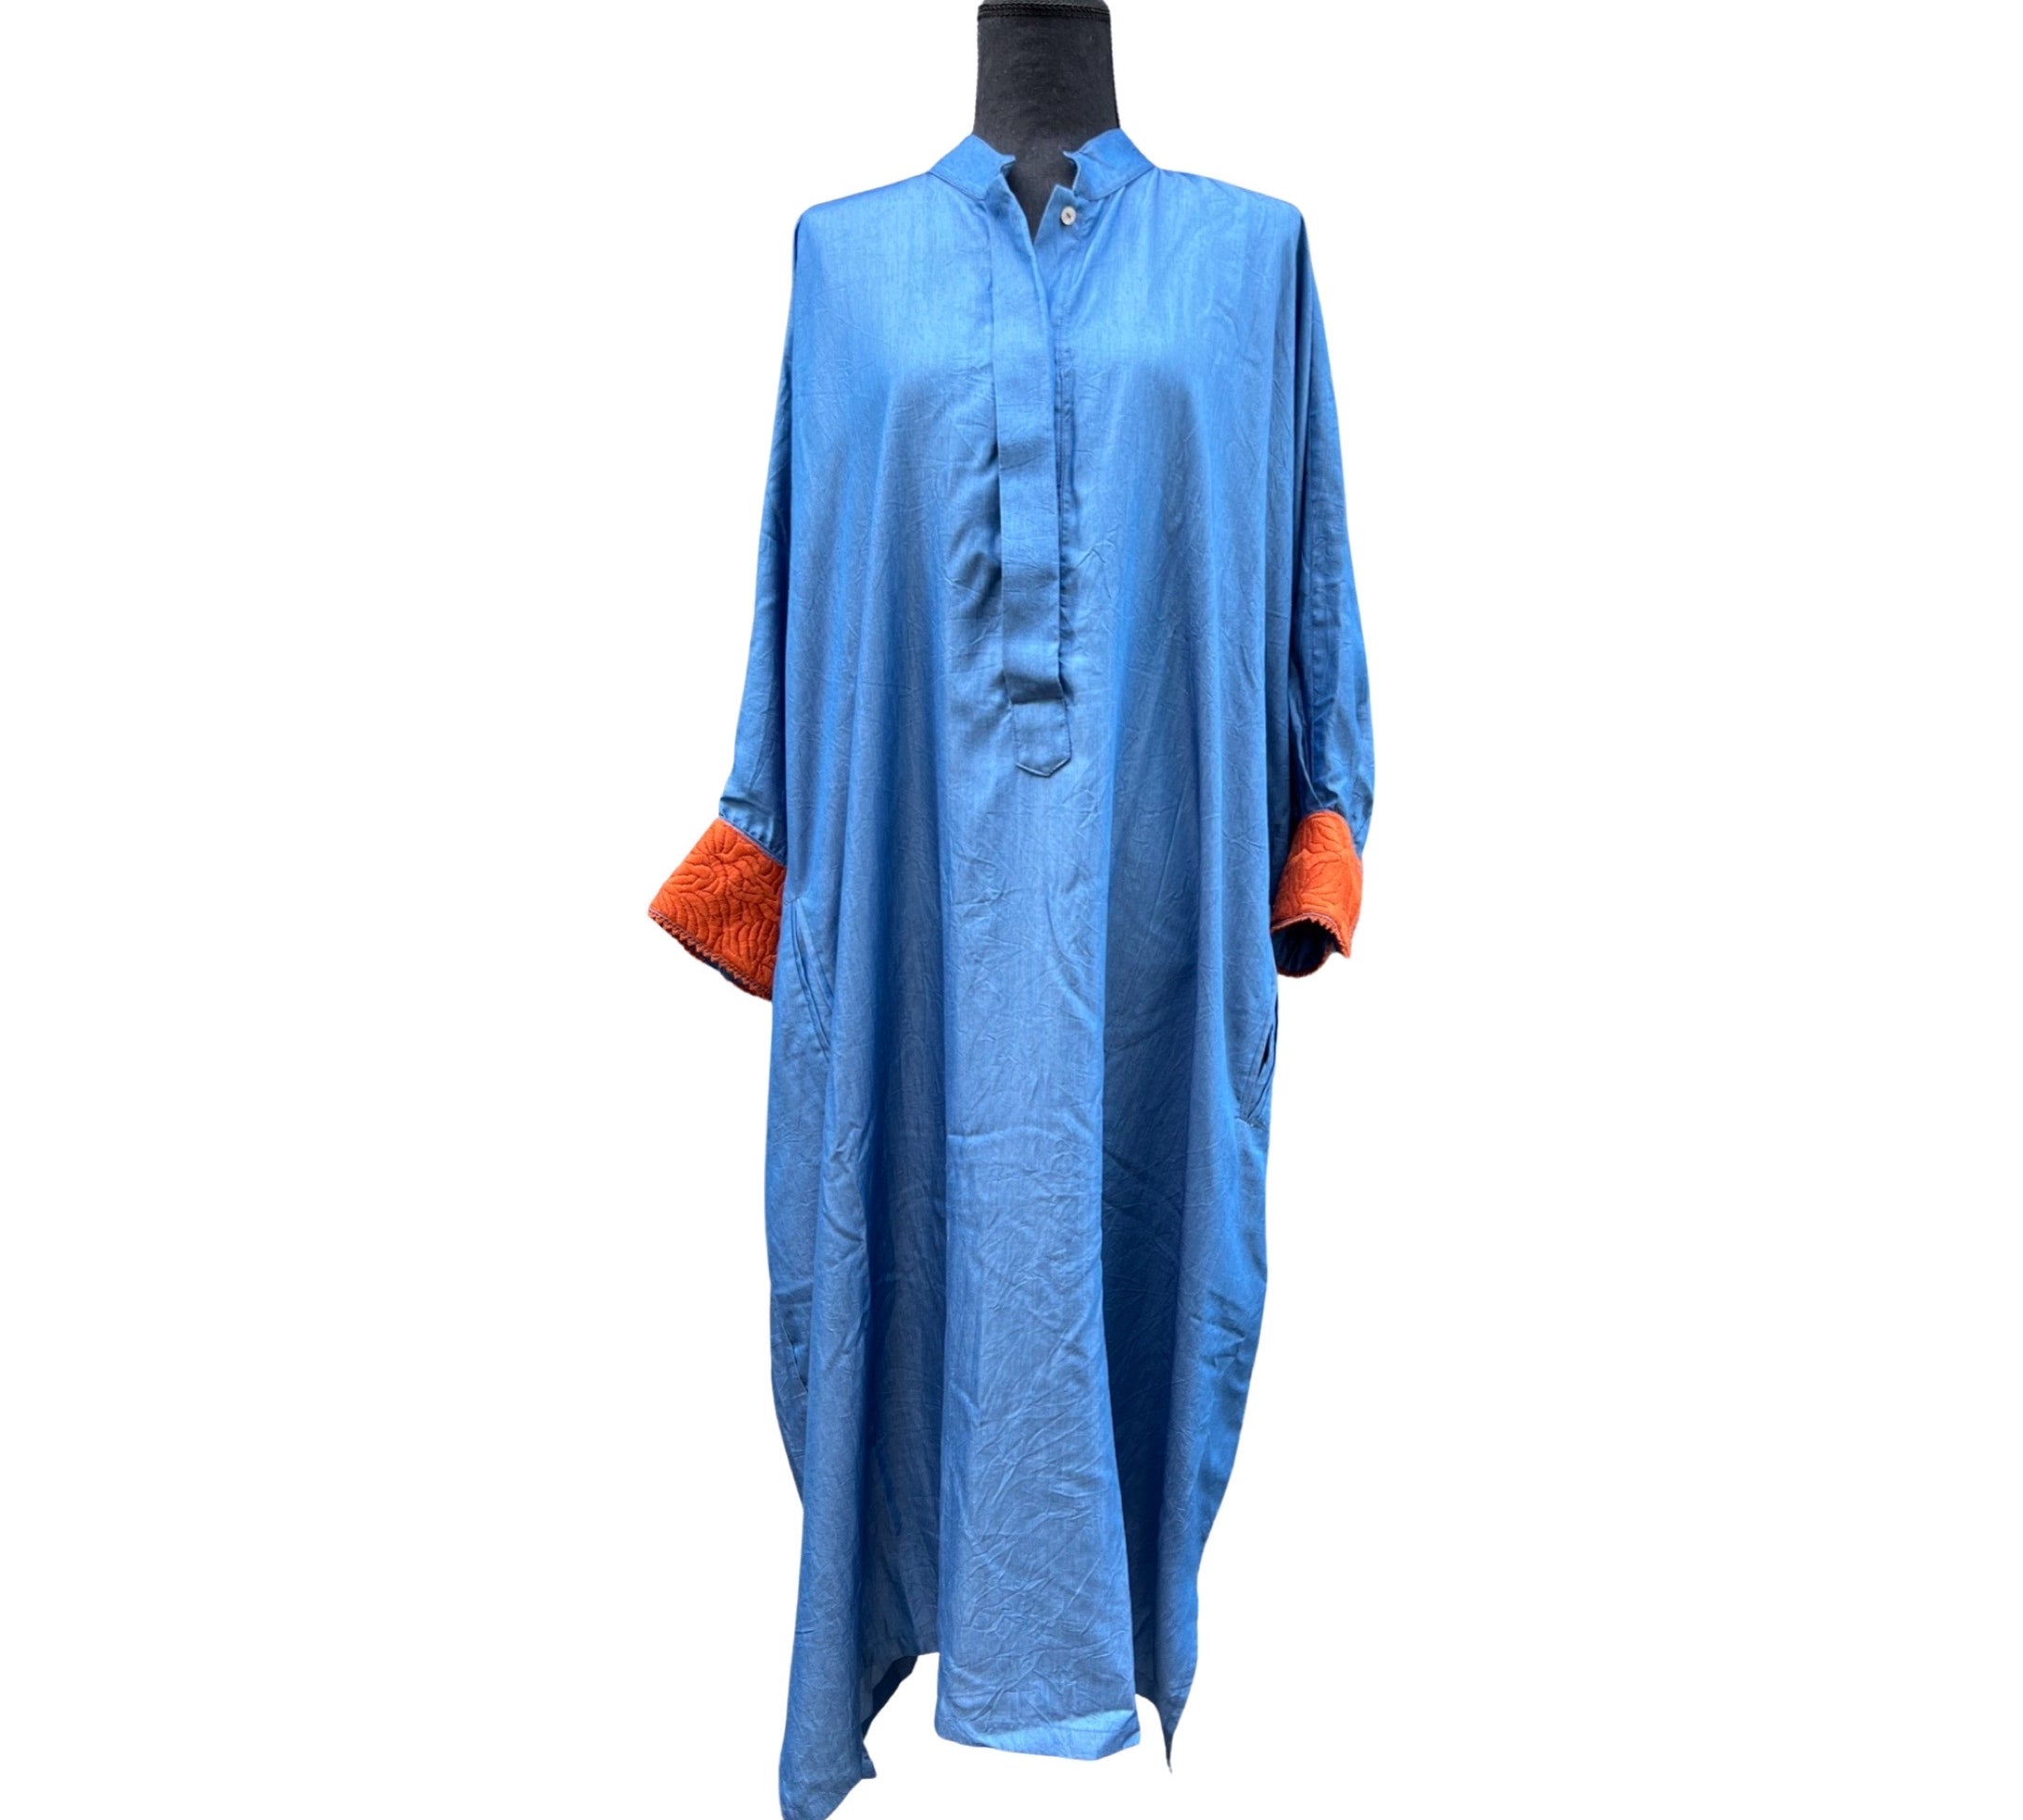 LABEL17 presents the long and stylish Denim Chambray Dress Alma, richly hand embroidered